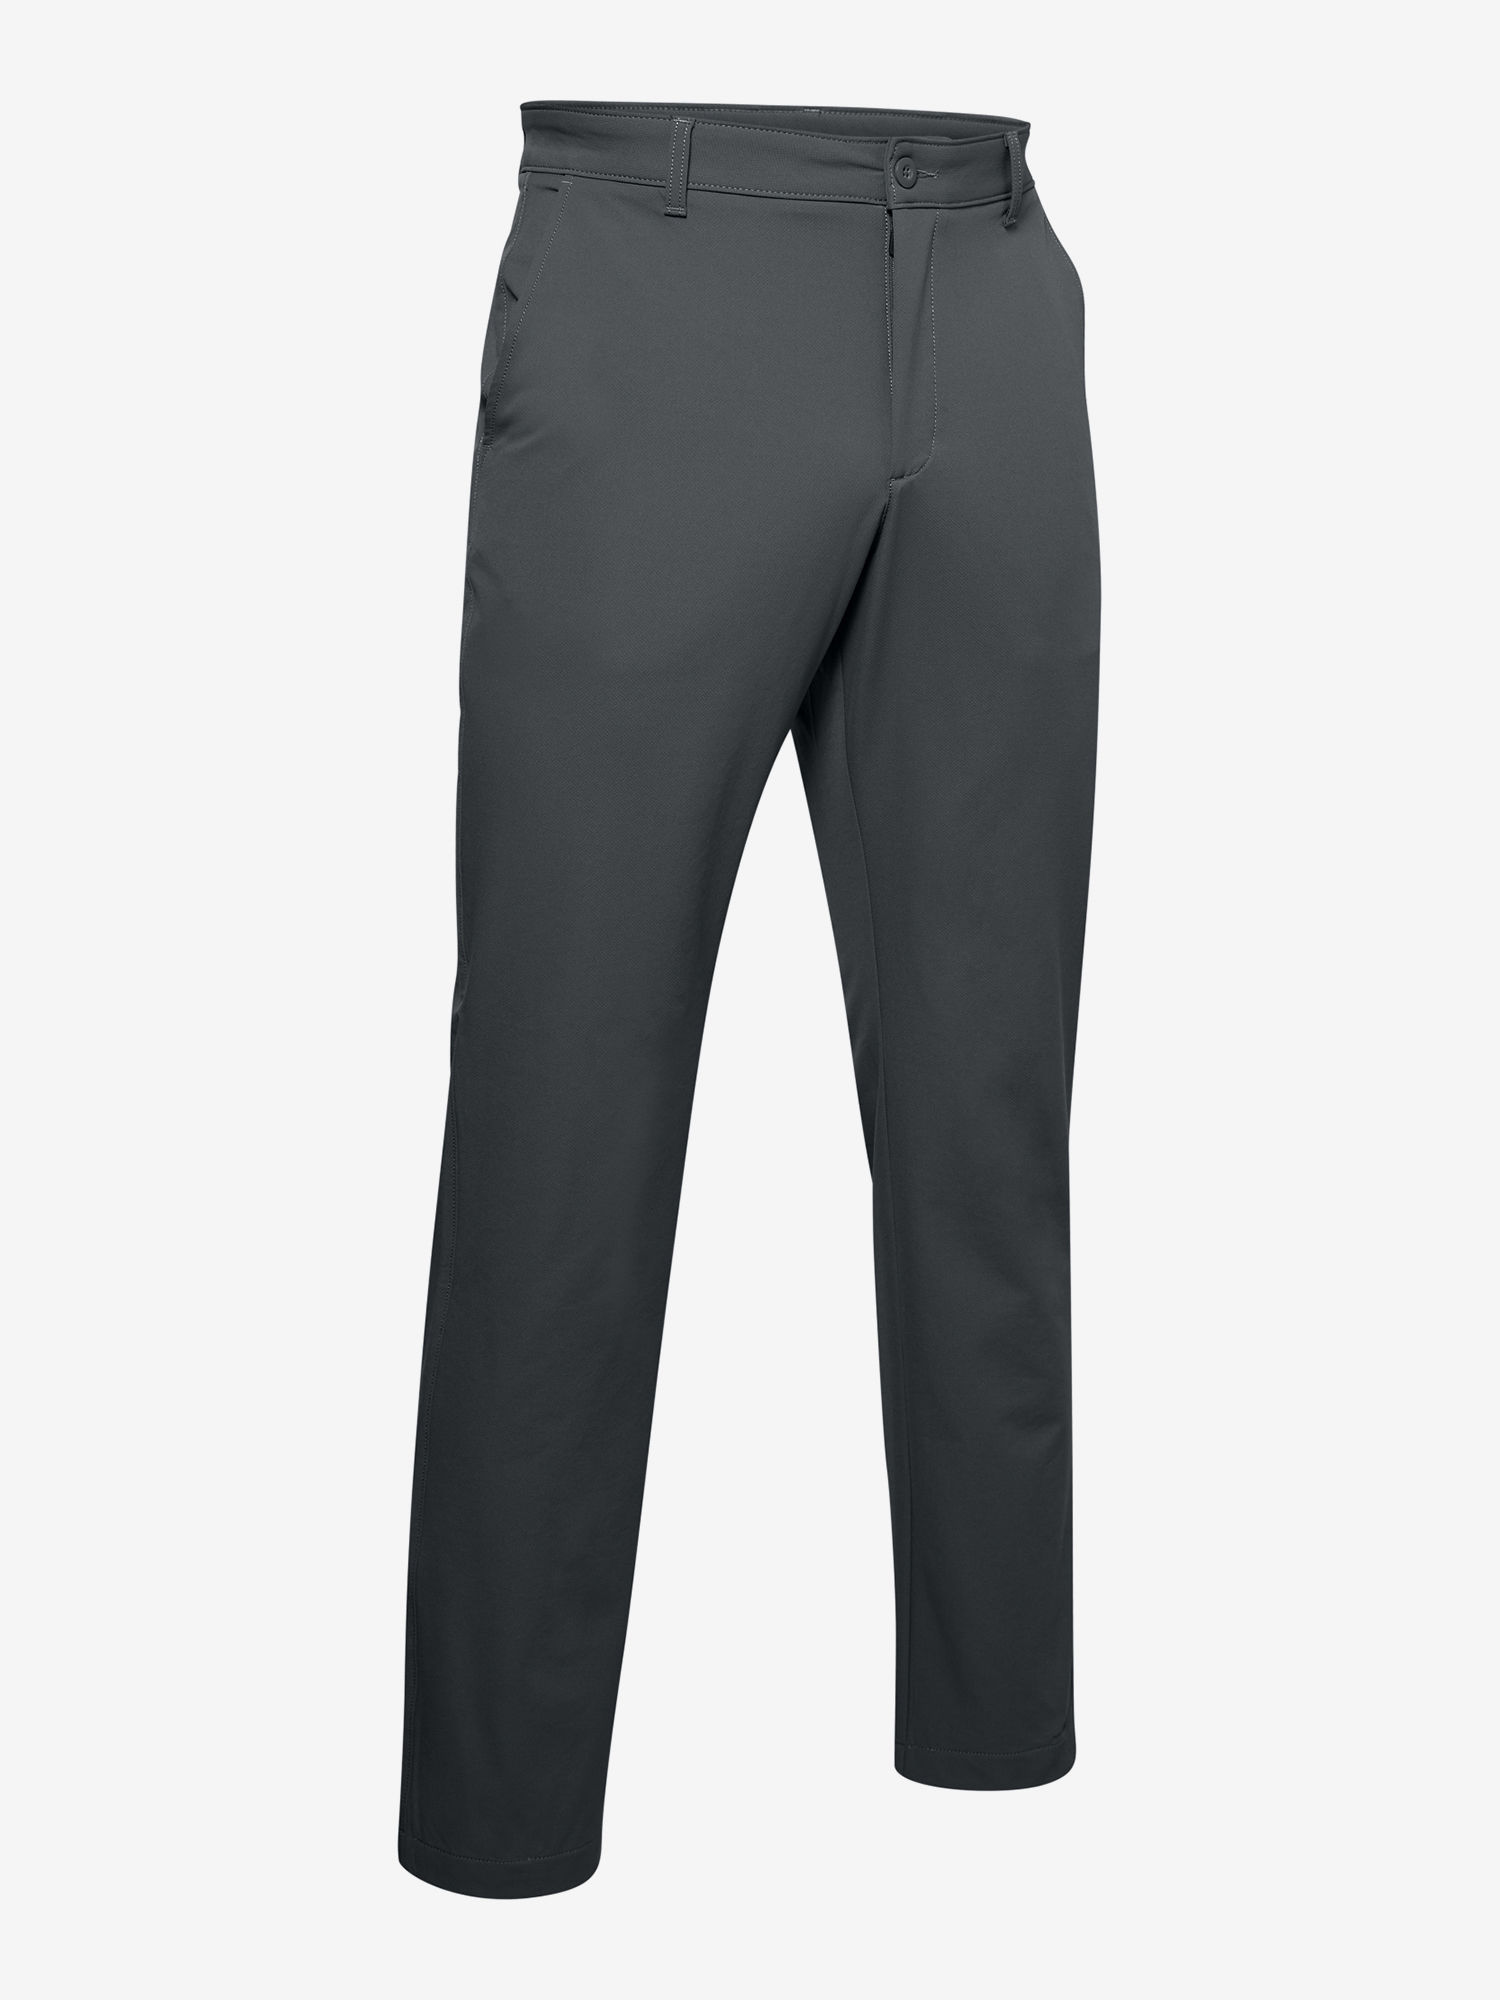 Kalhoty Under Armour Tech Pant-GRY (4)